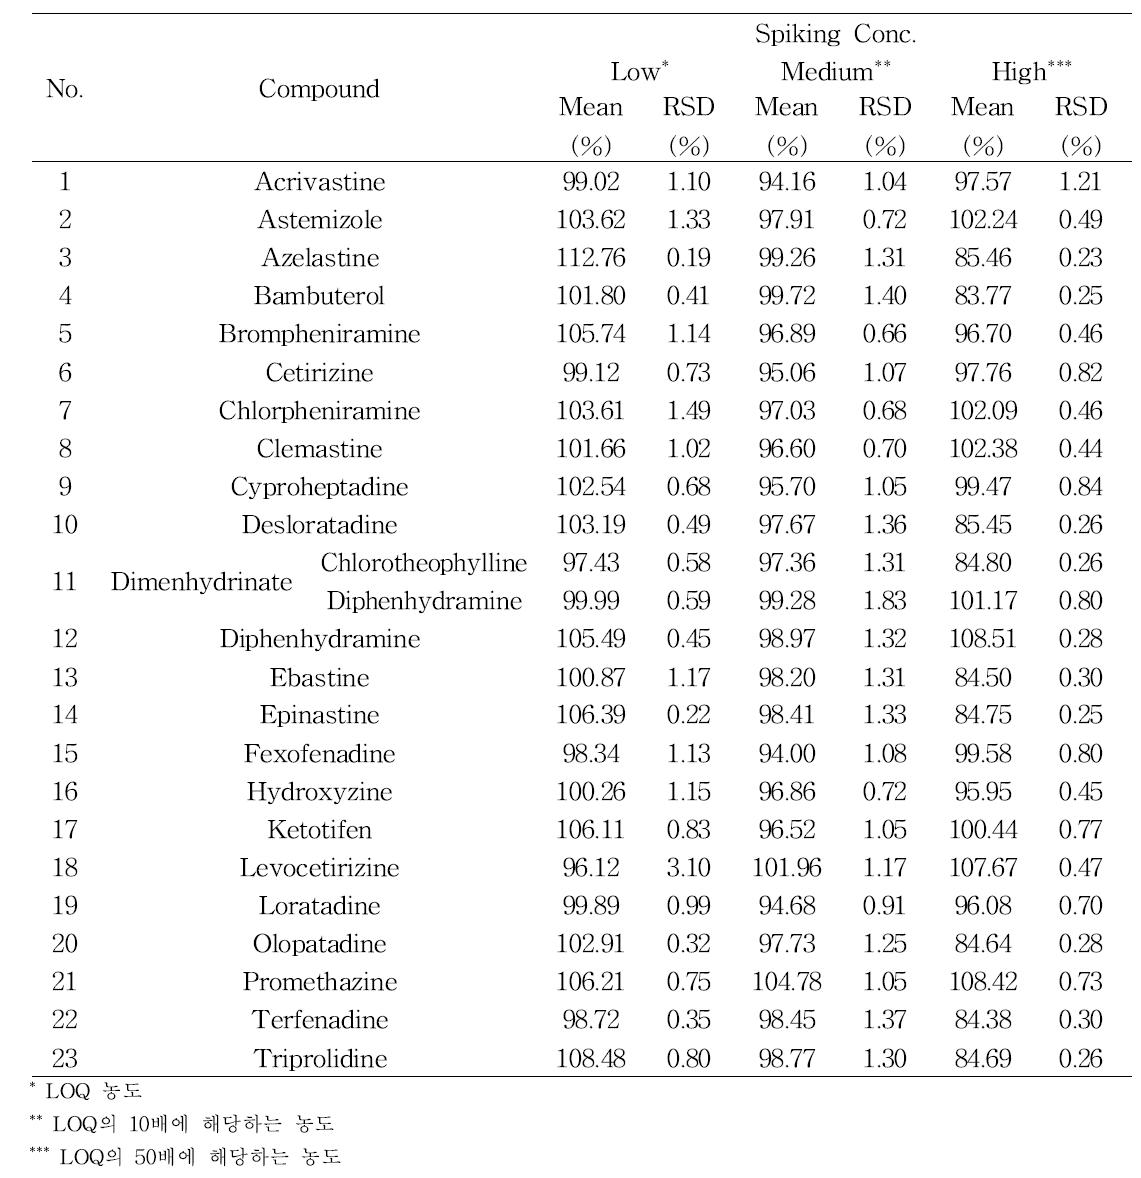 The recovery of 23 antihistamines in tablet sample for different concentrations